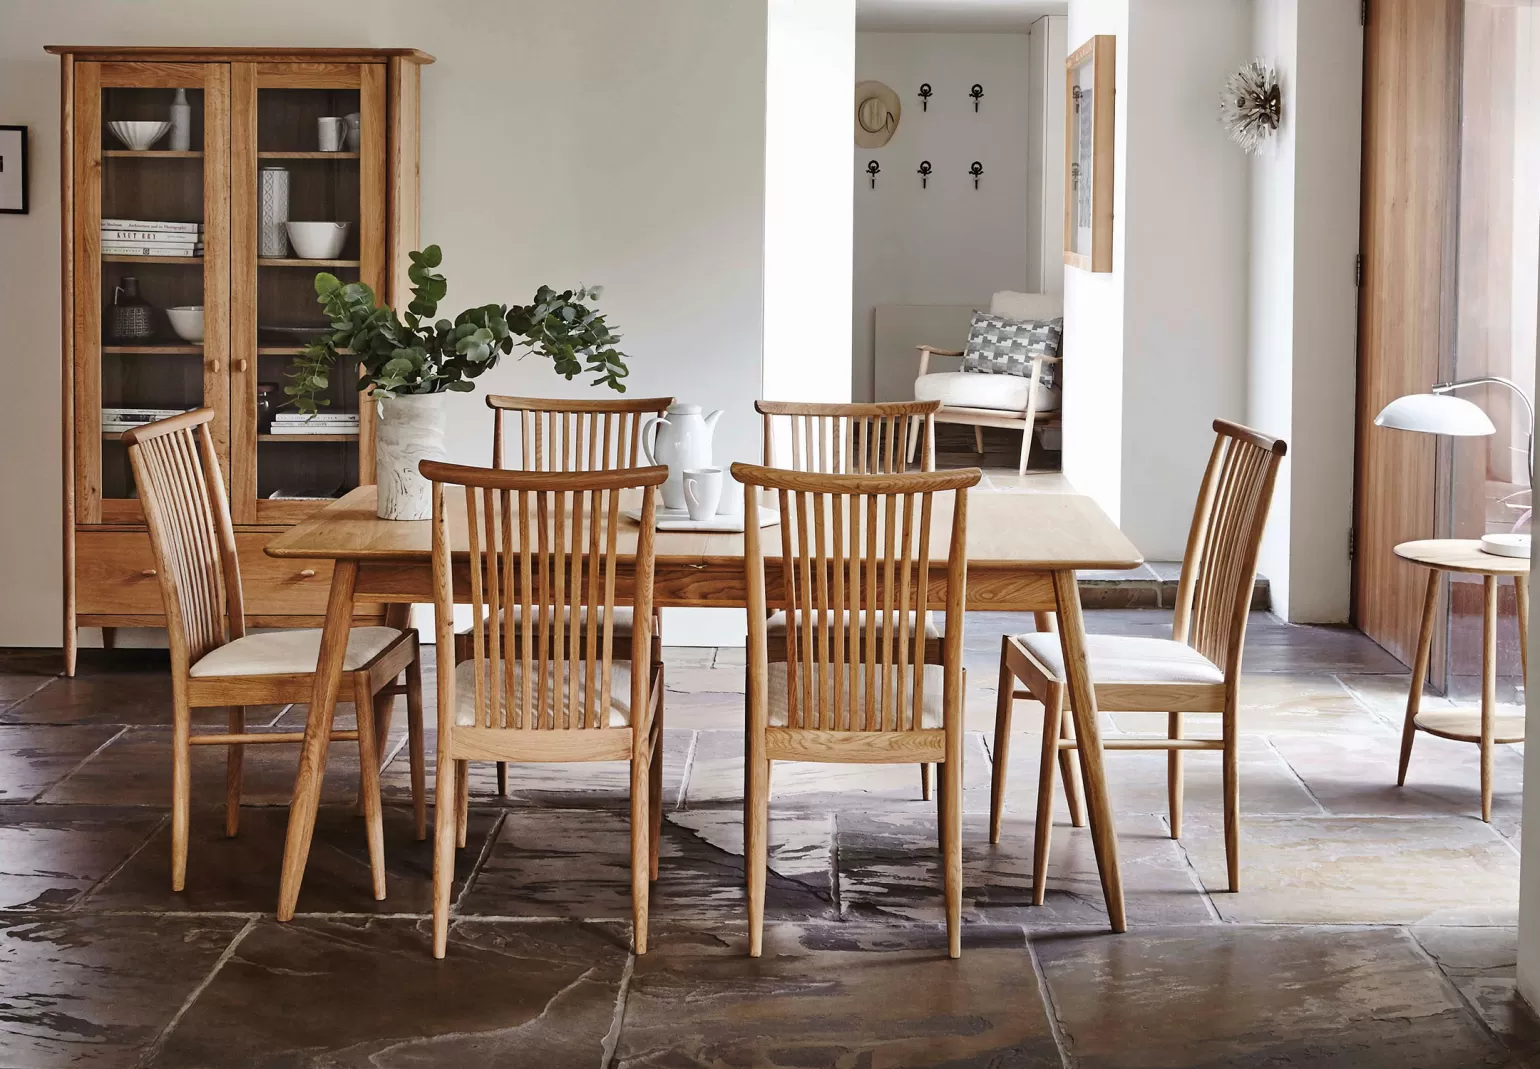 At Solent Beds & Furniture we pride ourselves on having one of the largest selections of living and dining collections available on the Isle of Wight. Why not browse all of our collections here to find the perfect look for your home? 
